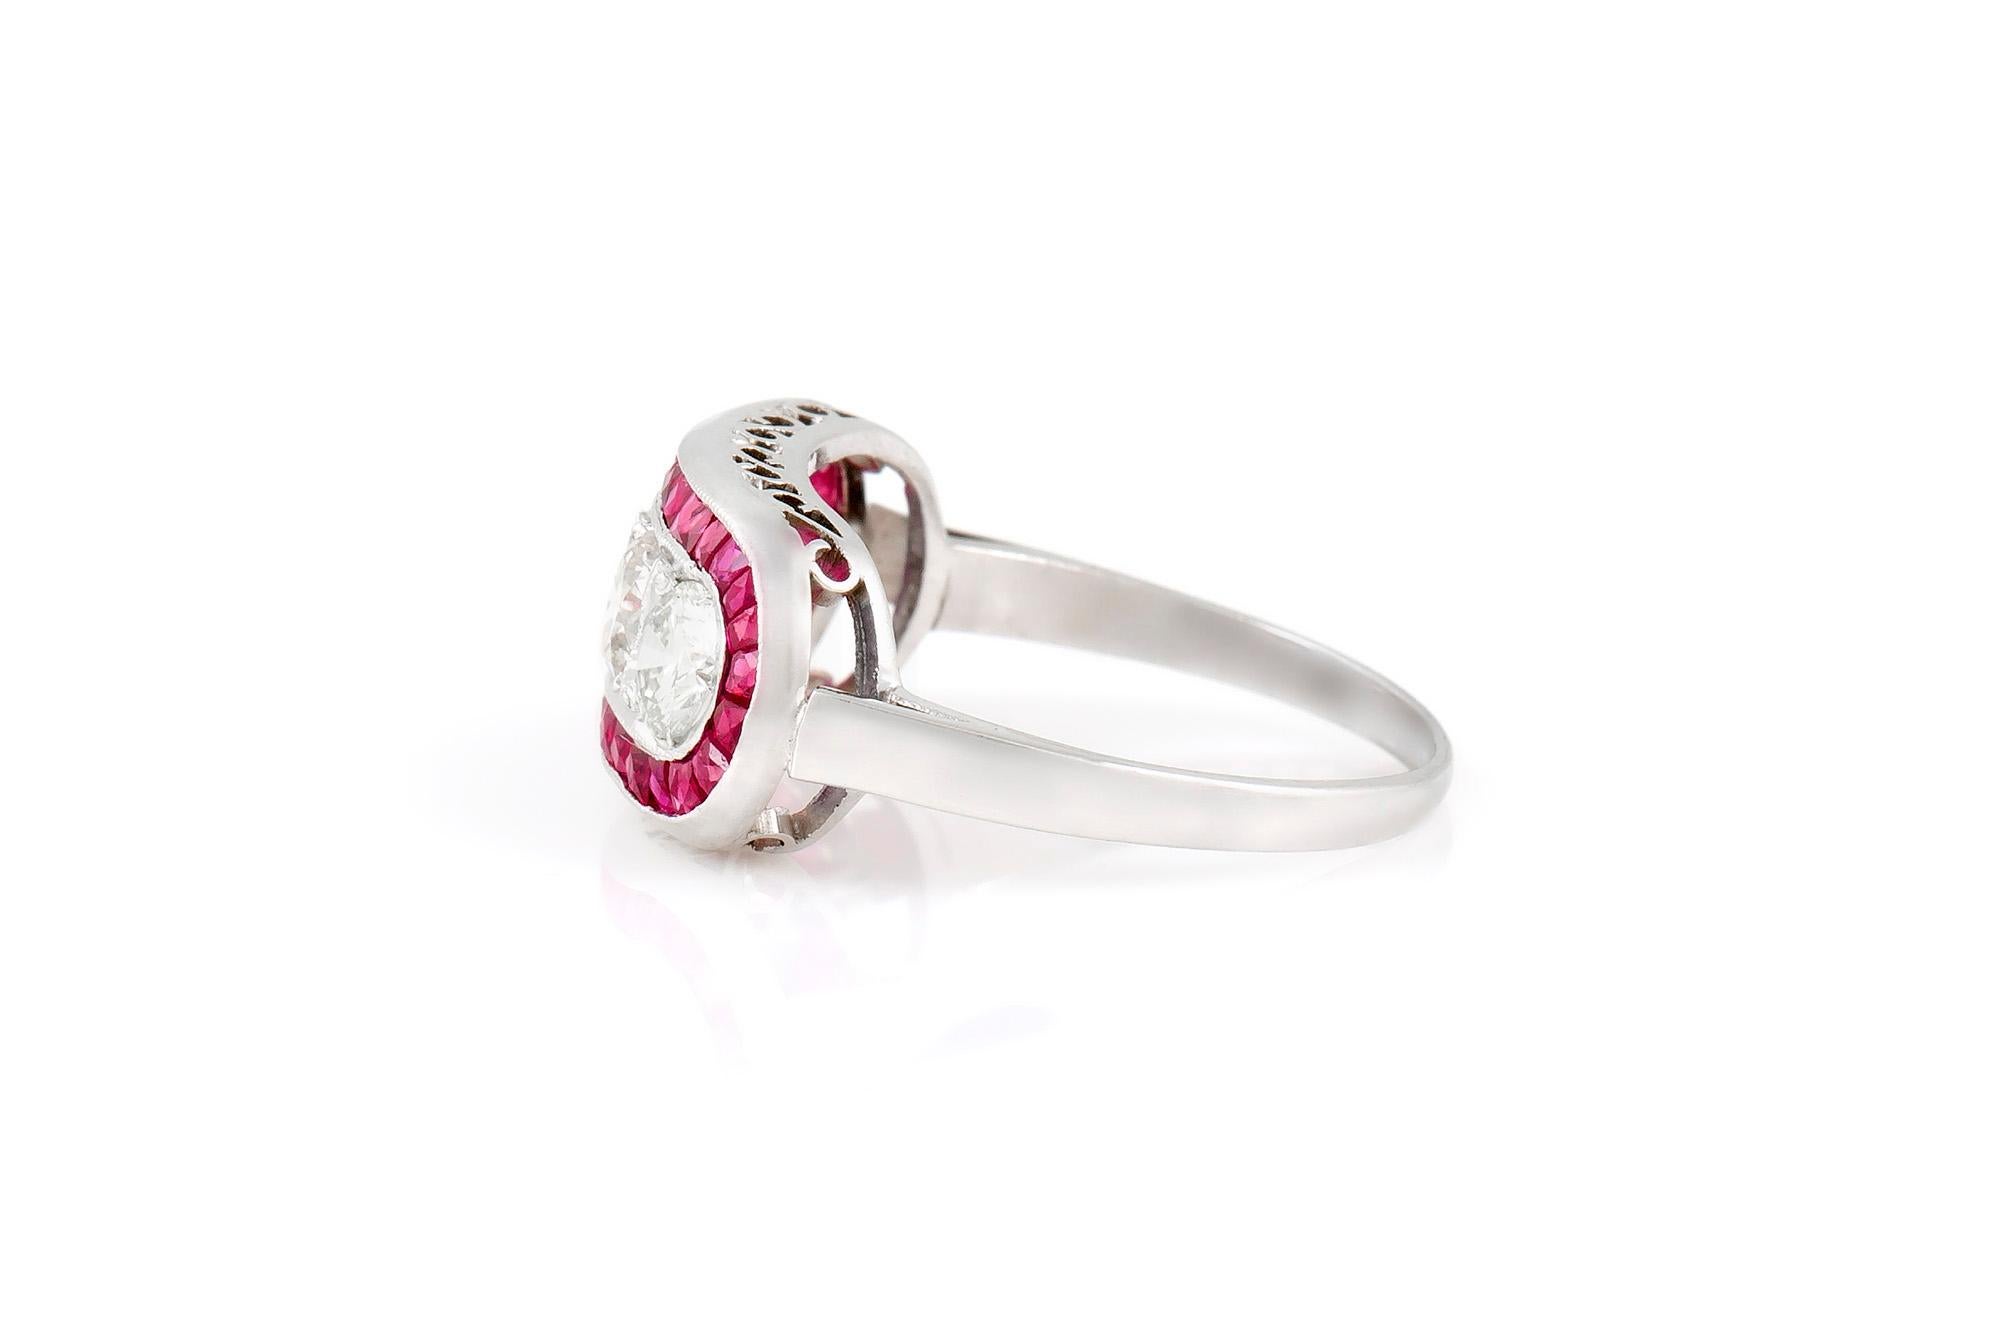 This ring is finely crafted in platinum with round brilliant cut diamonds weighing approximately a total of 1.20 carat and rubies weighing approximately a total of 1.20 carat. Circa 1970's.